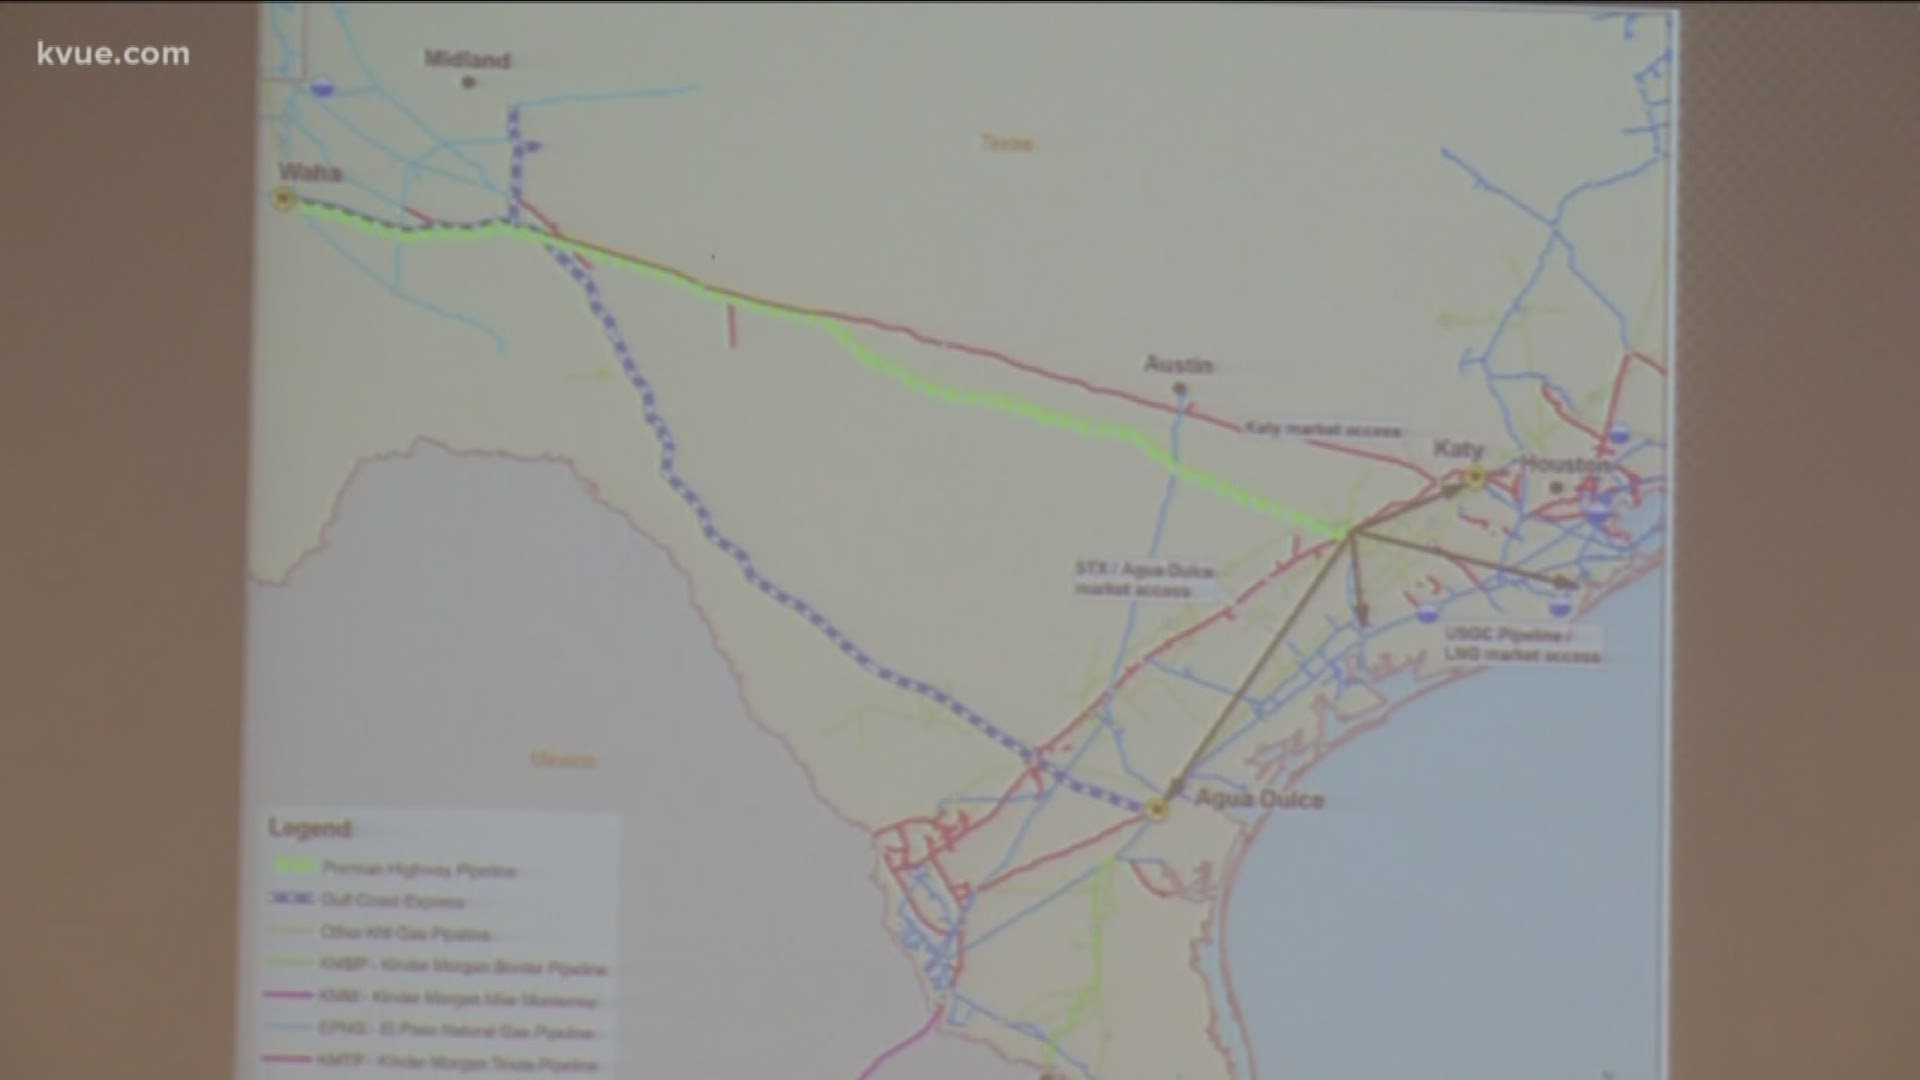 Landowners in Hays County say the proposed Permian Highway Pipeline is too close to homeowners and natural resources and should be routed elsewhere.